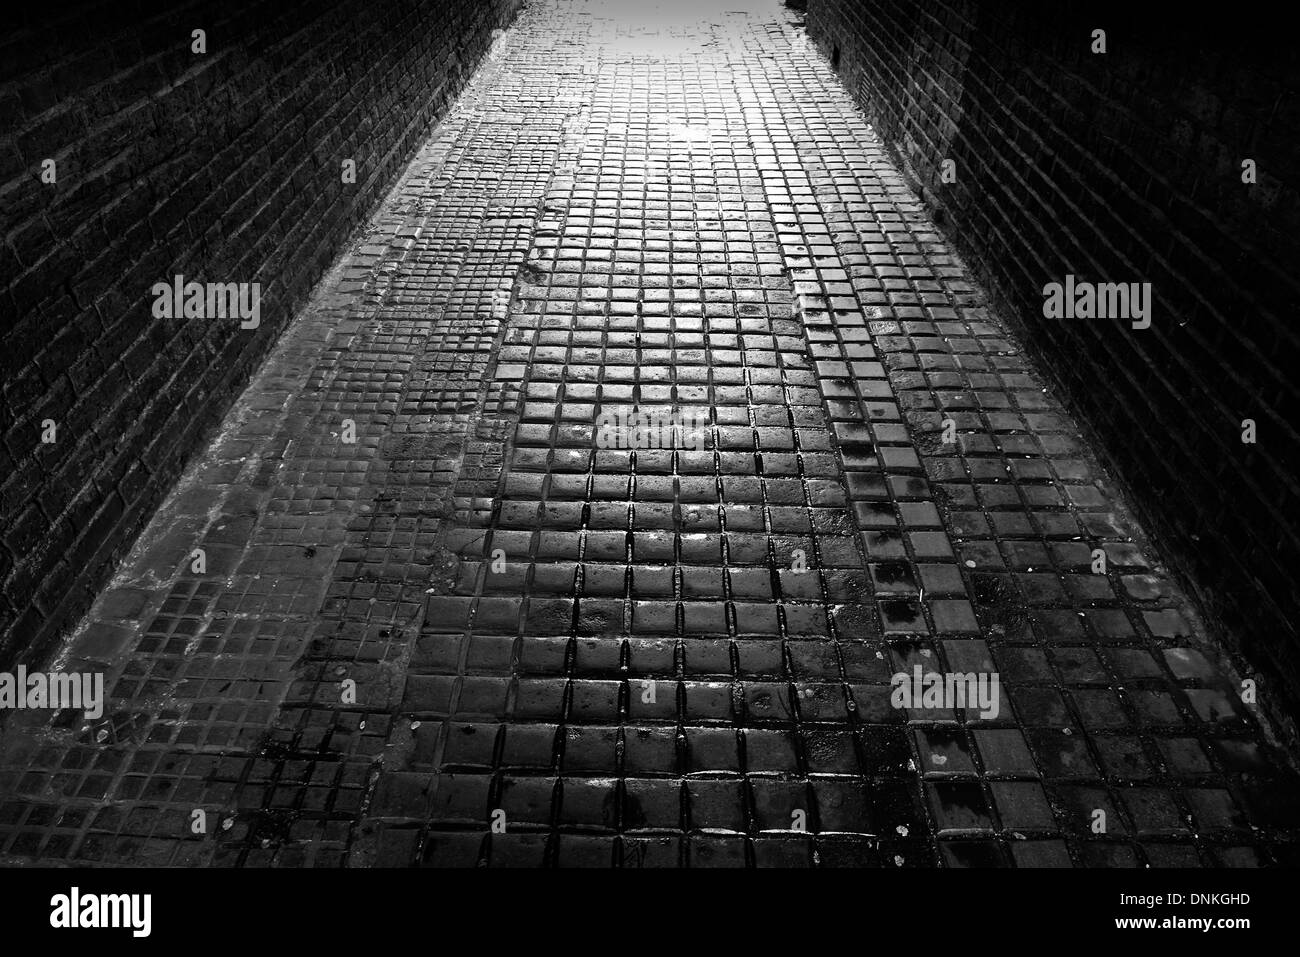 Cobbled alleyway backlit by light in South Woodford, London E18 Stock Photo